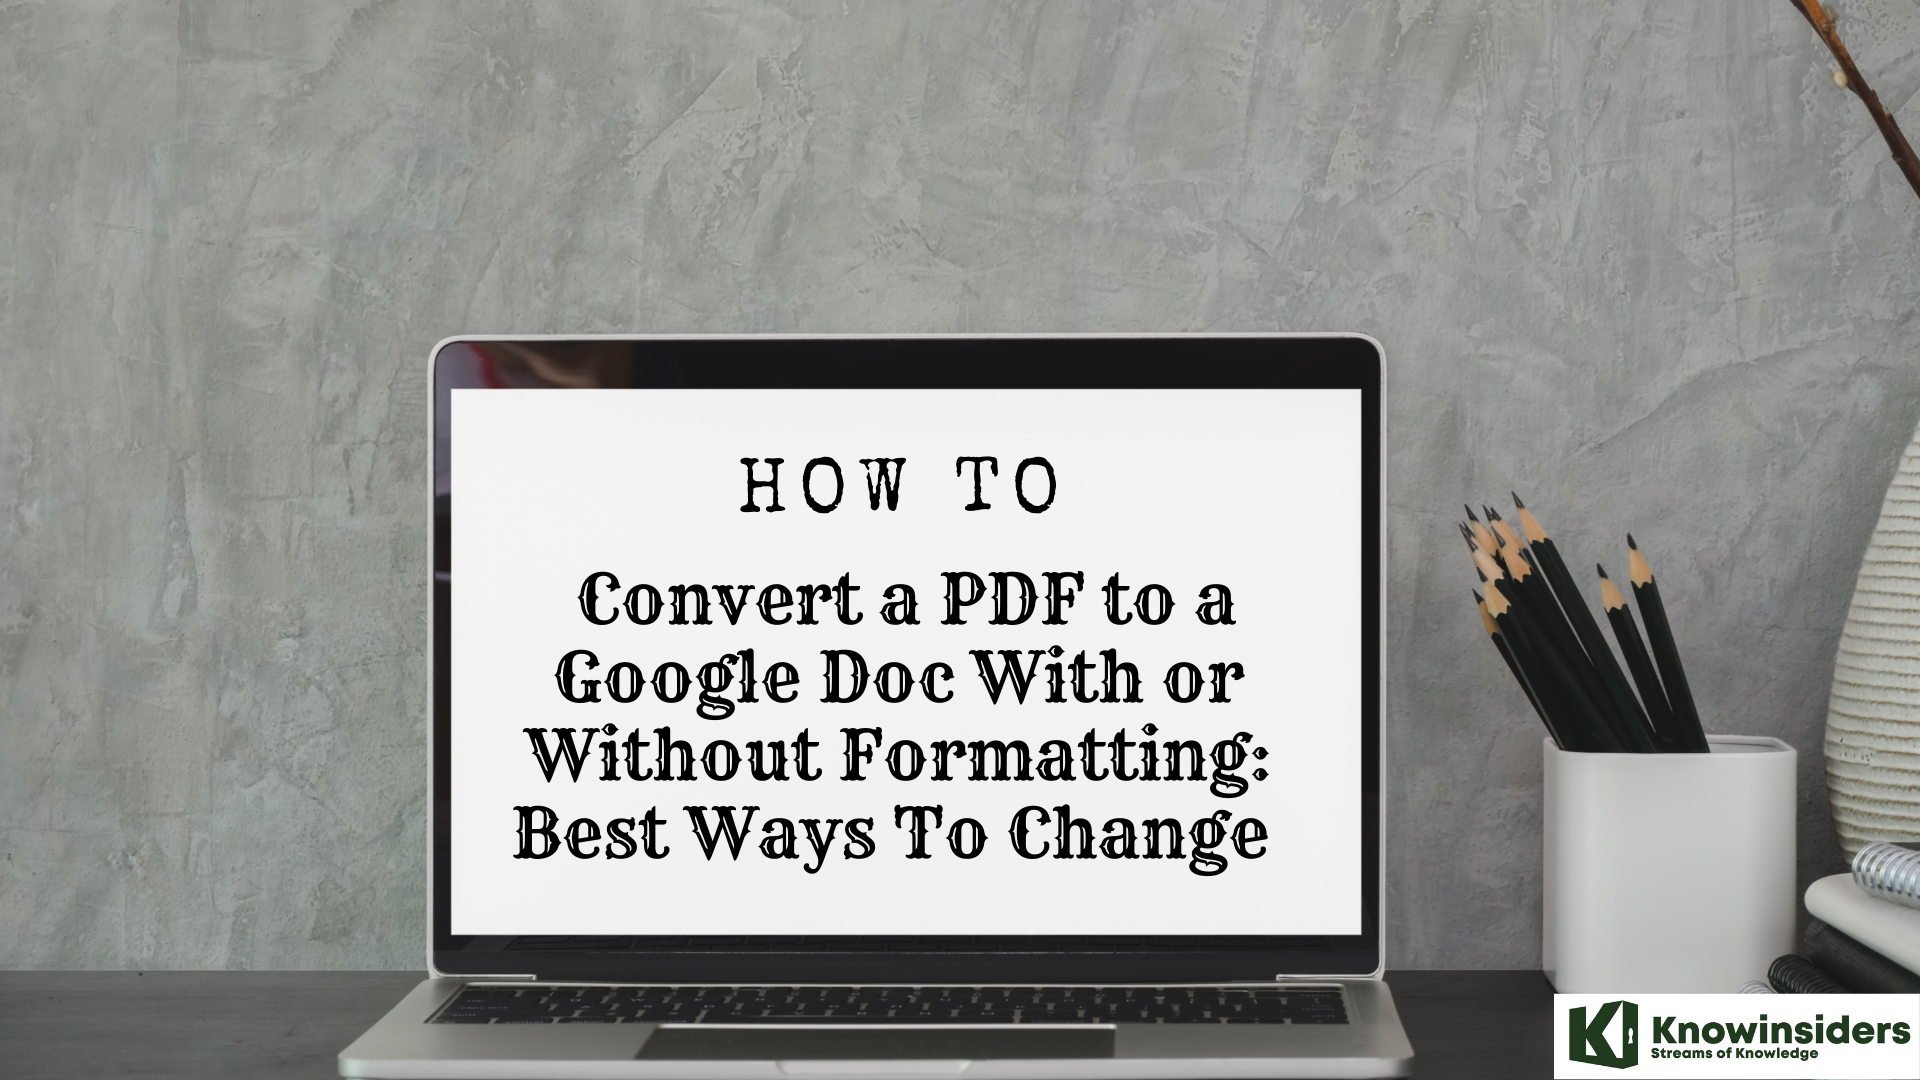 The Simpliest Ways to Convert a PDF to a Google Doc With or Without Formatting